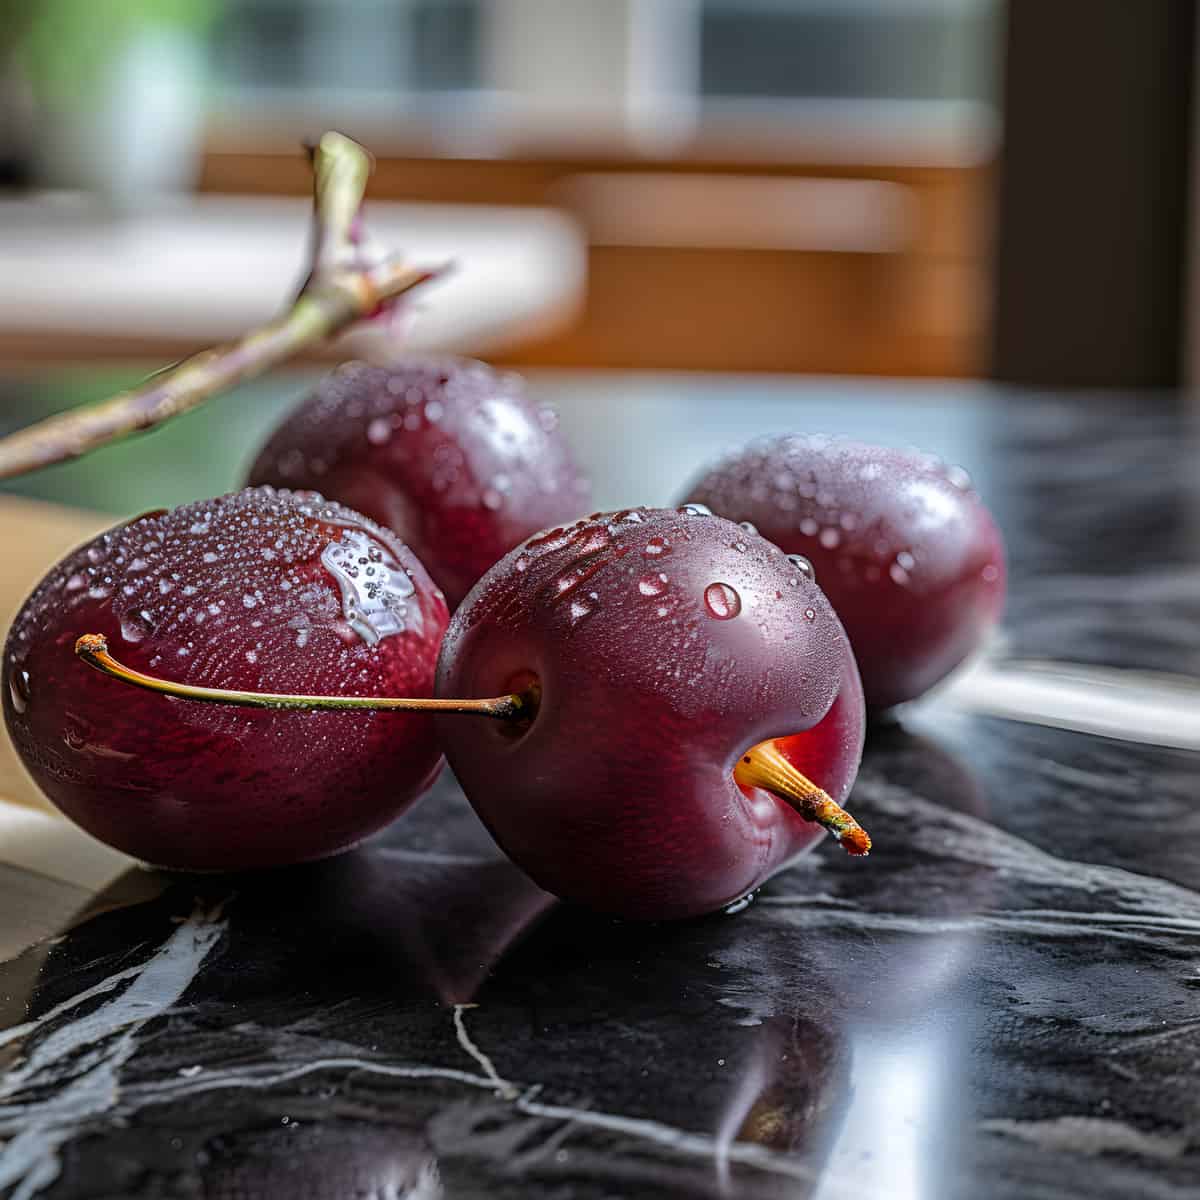 Prunus Alaica Fruit on a kitchen counter